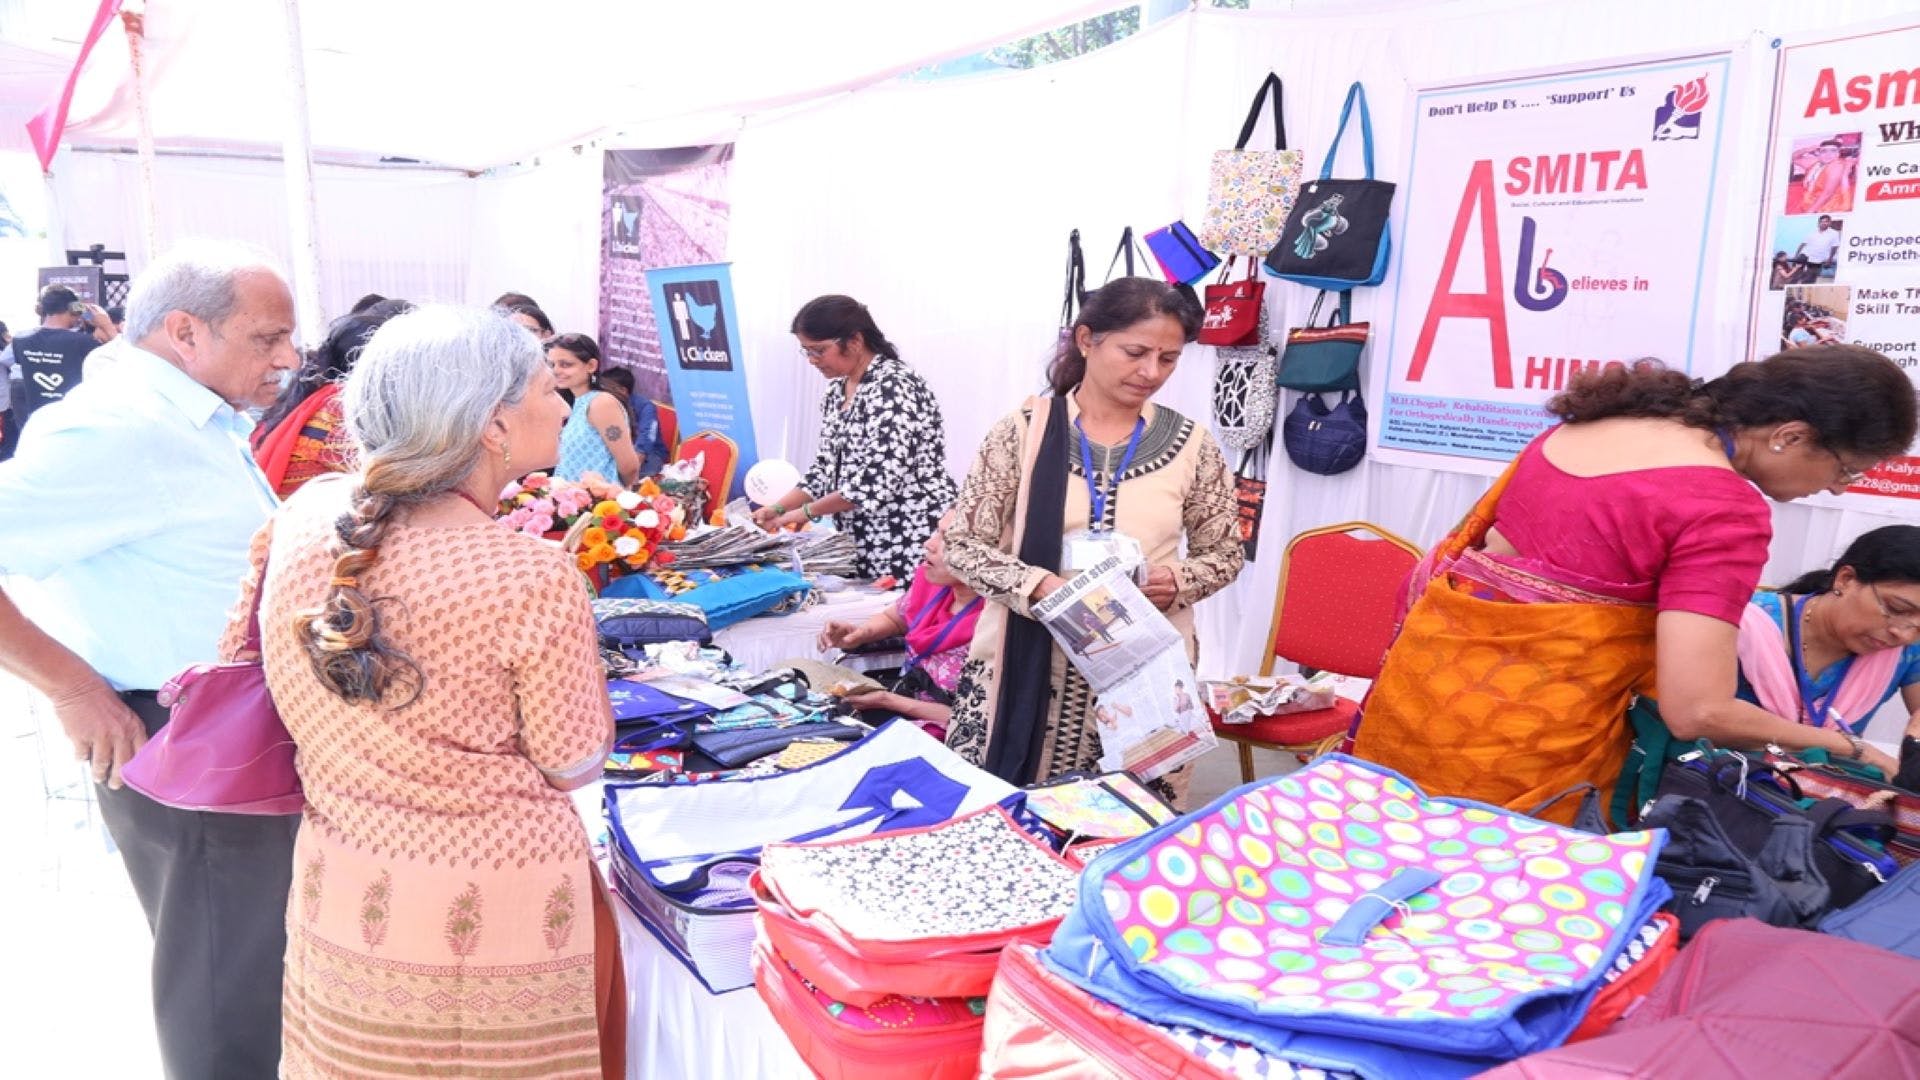 Selling,Public space,Pink,Bazaar,Event,Market,Textile,Marketplace,Stall,City